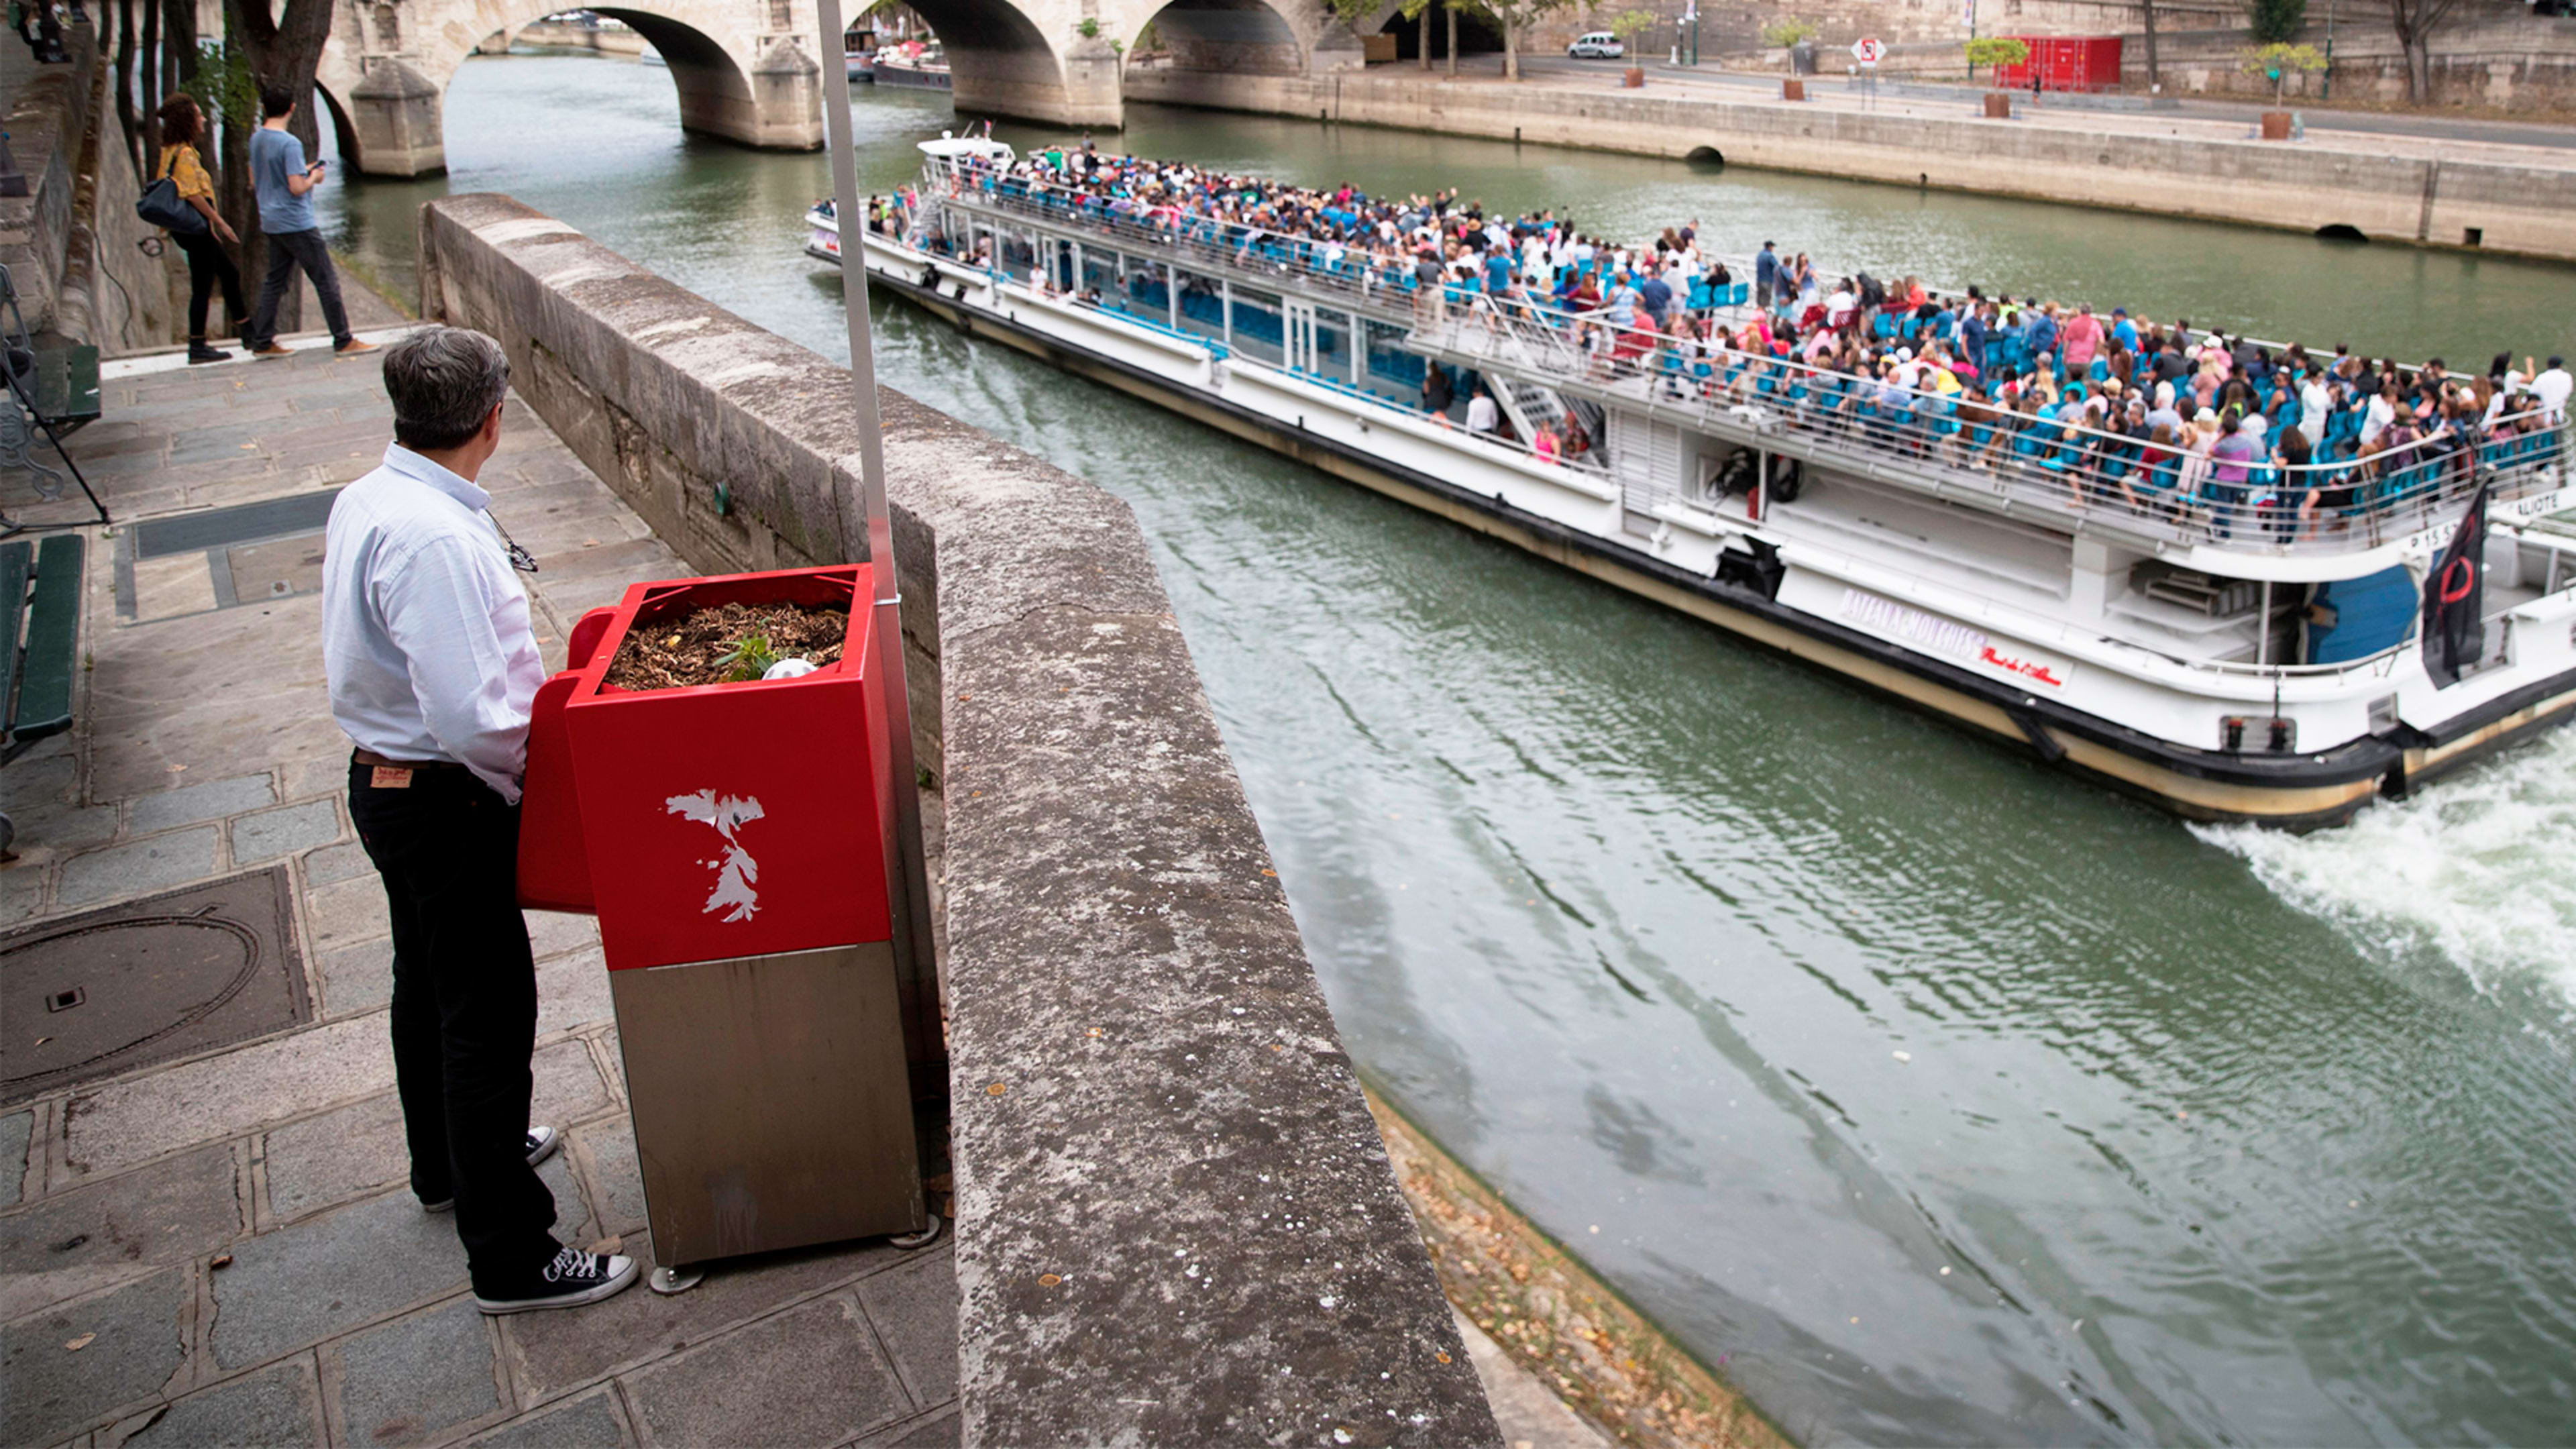 Paris redesigned the urinal, but the real problem is the urinators